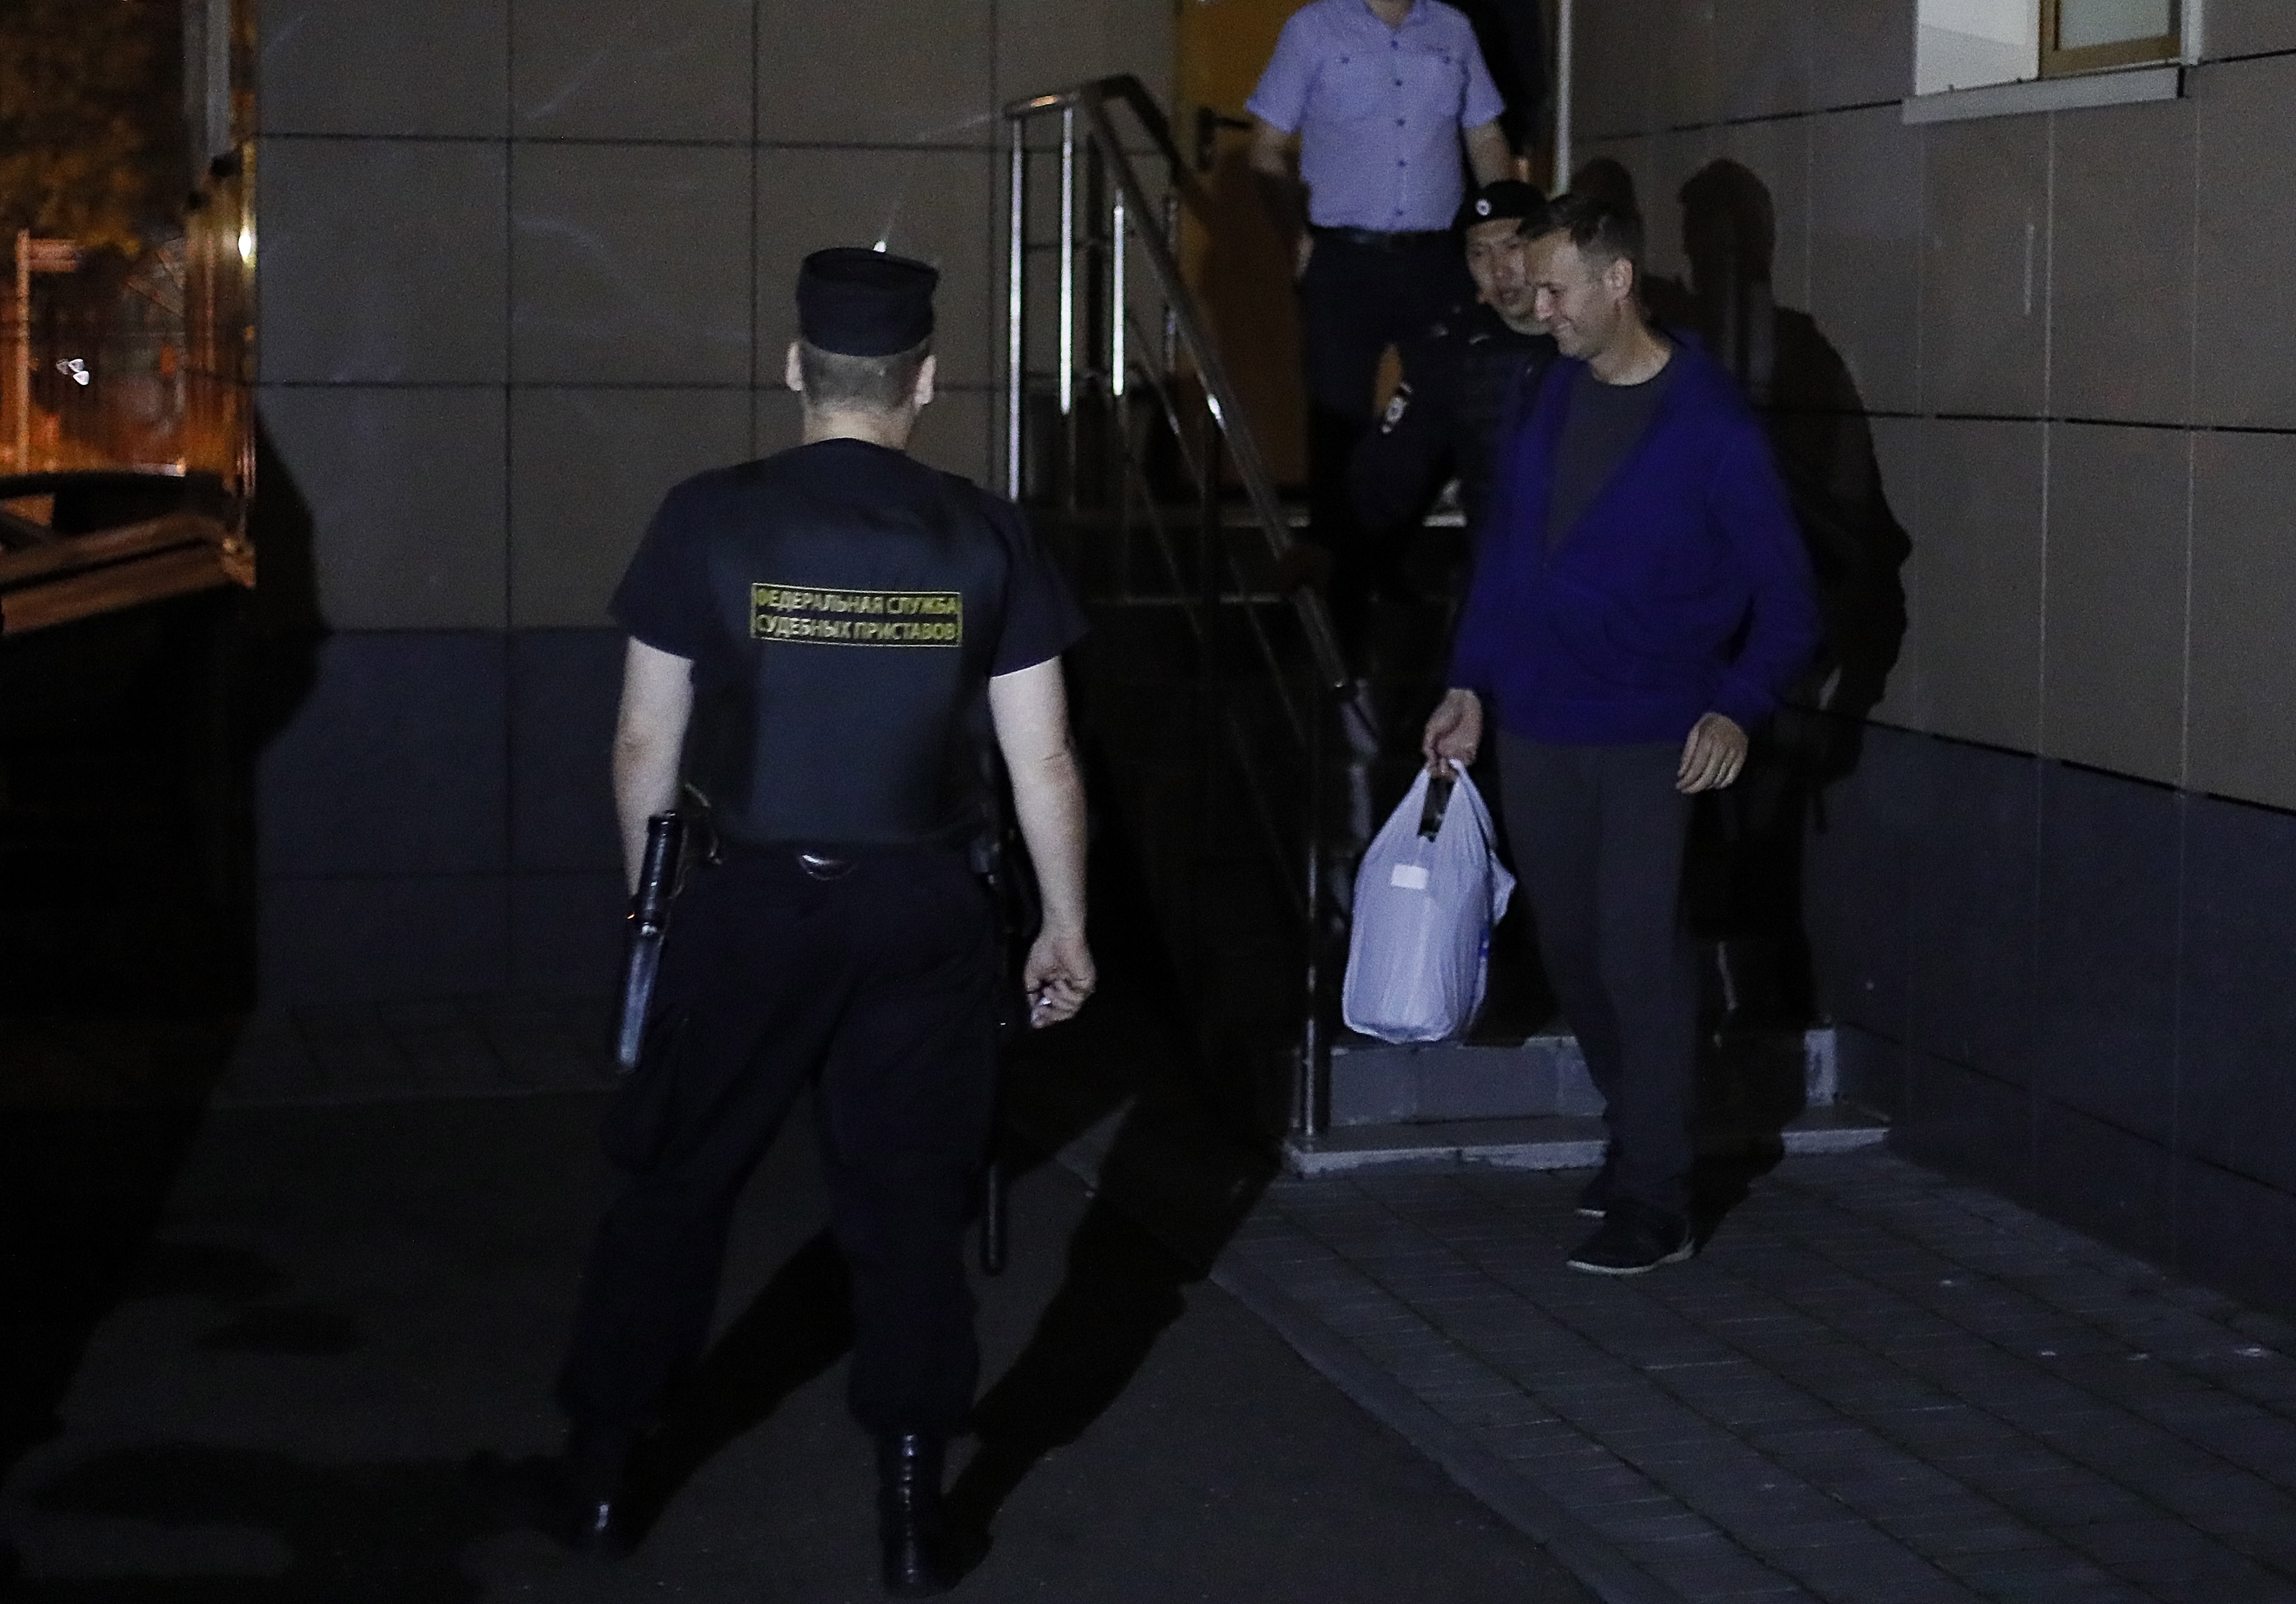 epa07738436 Russian policemen escort Russian liberal opposition leader Alexei Navalny (R) to a car after a court session at Simonovsky District court in Moscow, Russia, late 24 July 2019. Alexei Navalny was again arrested on 24 July 2019 while leaving his house for jogging. The Simonovsky District Court of Moscow arrested Alexei Navalny, the founder of the Anti-Corruption Foundation, for 30 days for appealing to participate in an unauthorized protest action on 27 July in Moscow.  EPA/SERGEI ILNITSKY